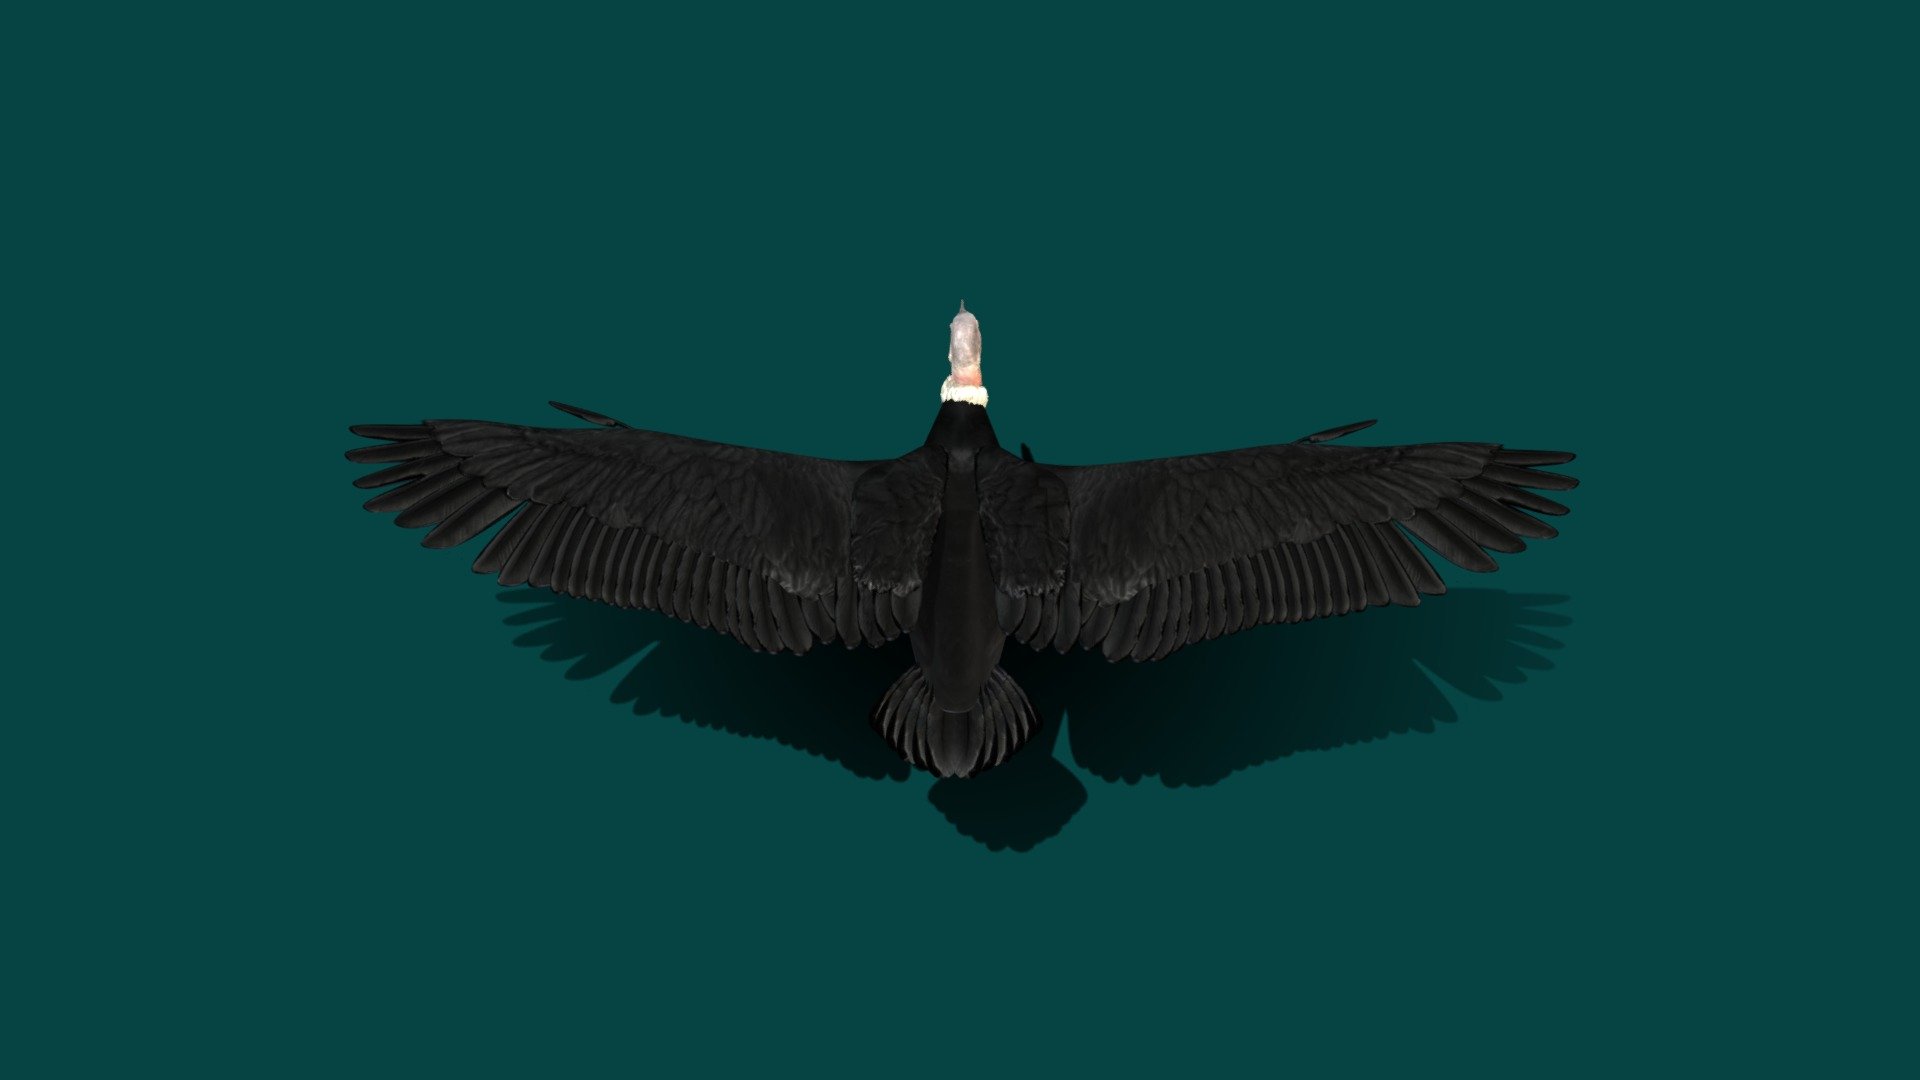 Testing before Rig for Game play 
The Andean condor is a giant South American Cathartid vulture and is the only member of the genus Vultur. Found in the Andes mountains and adjacent Pacific coasts of western South America, the Andean condor is the largest flying bird in the world by combined measurement of weight and wingspan 3d model